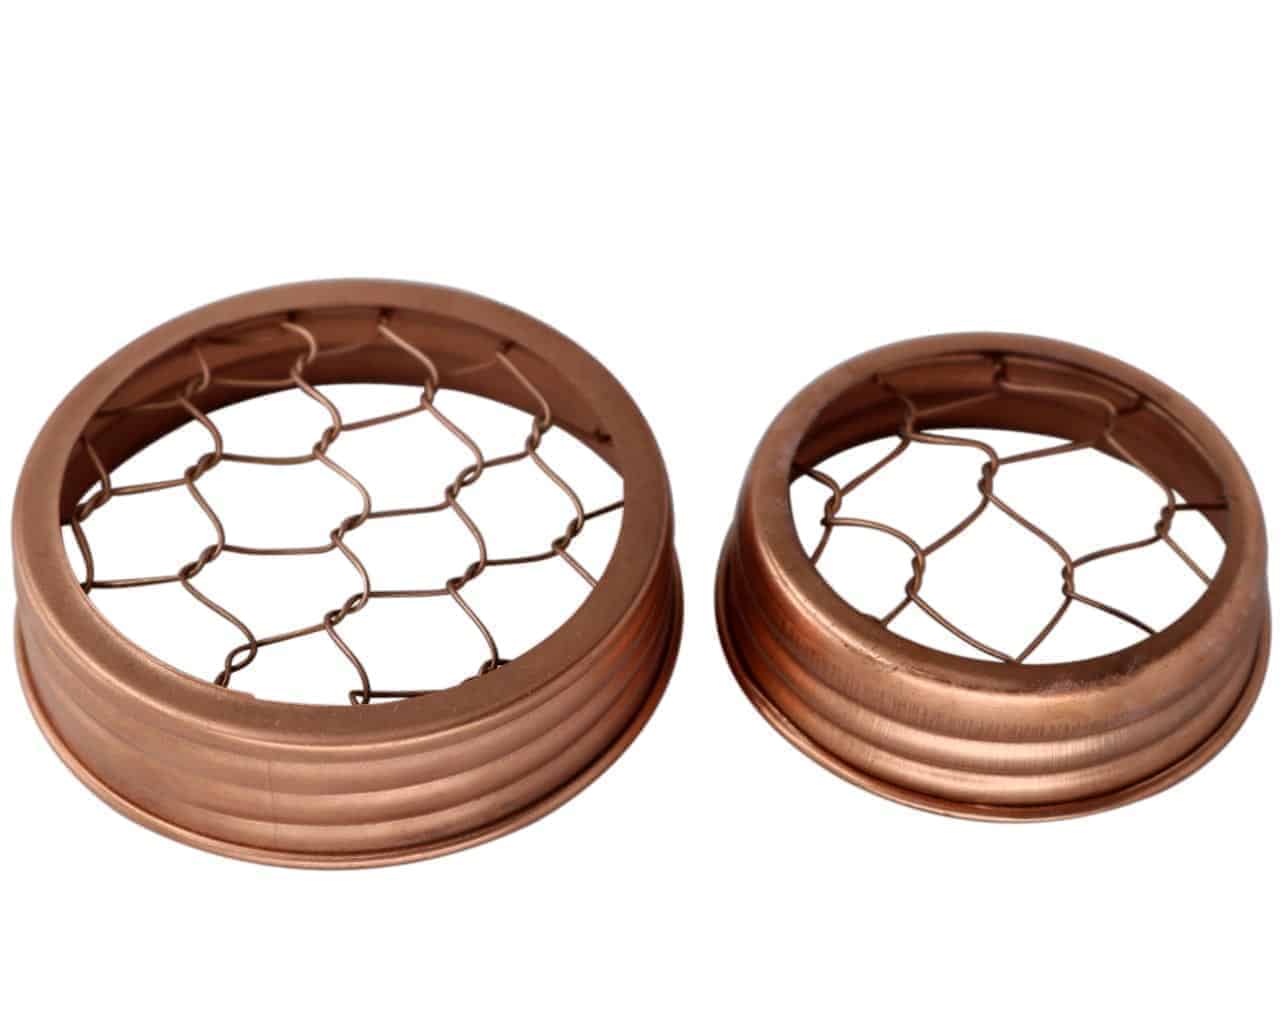 Shiny copper frog / flower organizer lids with chicken wire for regular and wide mouth Mason jars